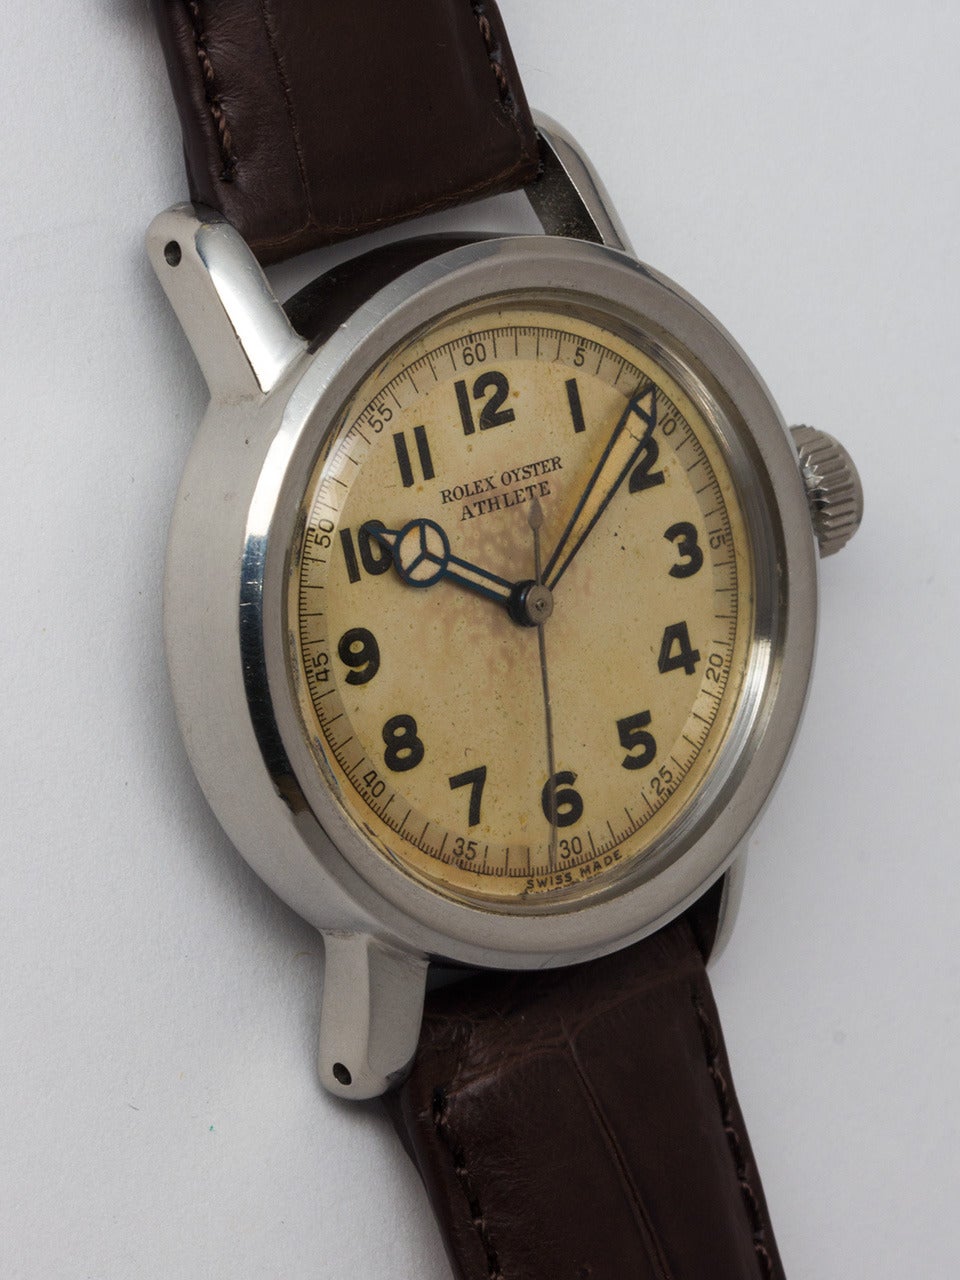 Rolex Stainless Steel Oyster Athlete Wristwatch, Ref 4127, serial number 215,XXX, circa 1943. 32 x 40mm Oyster case with wide rounded bezel and early Oyster Patent crown. Beautiful original silvered dial with nicely patinaed luminous indexes and